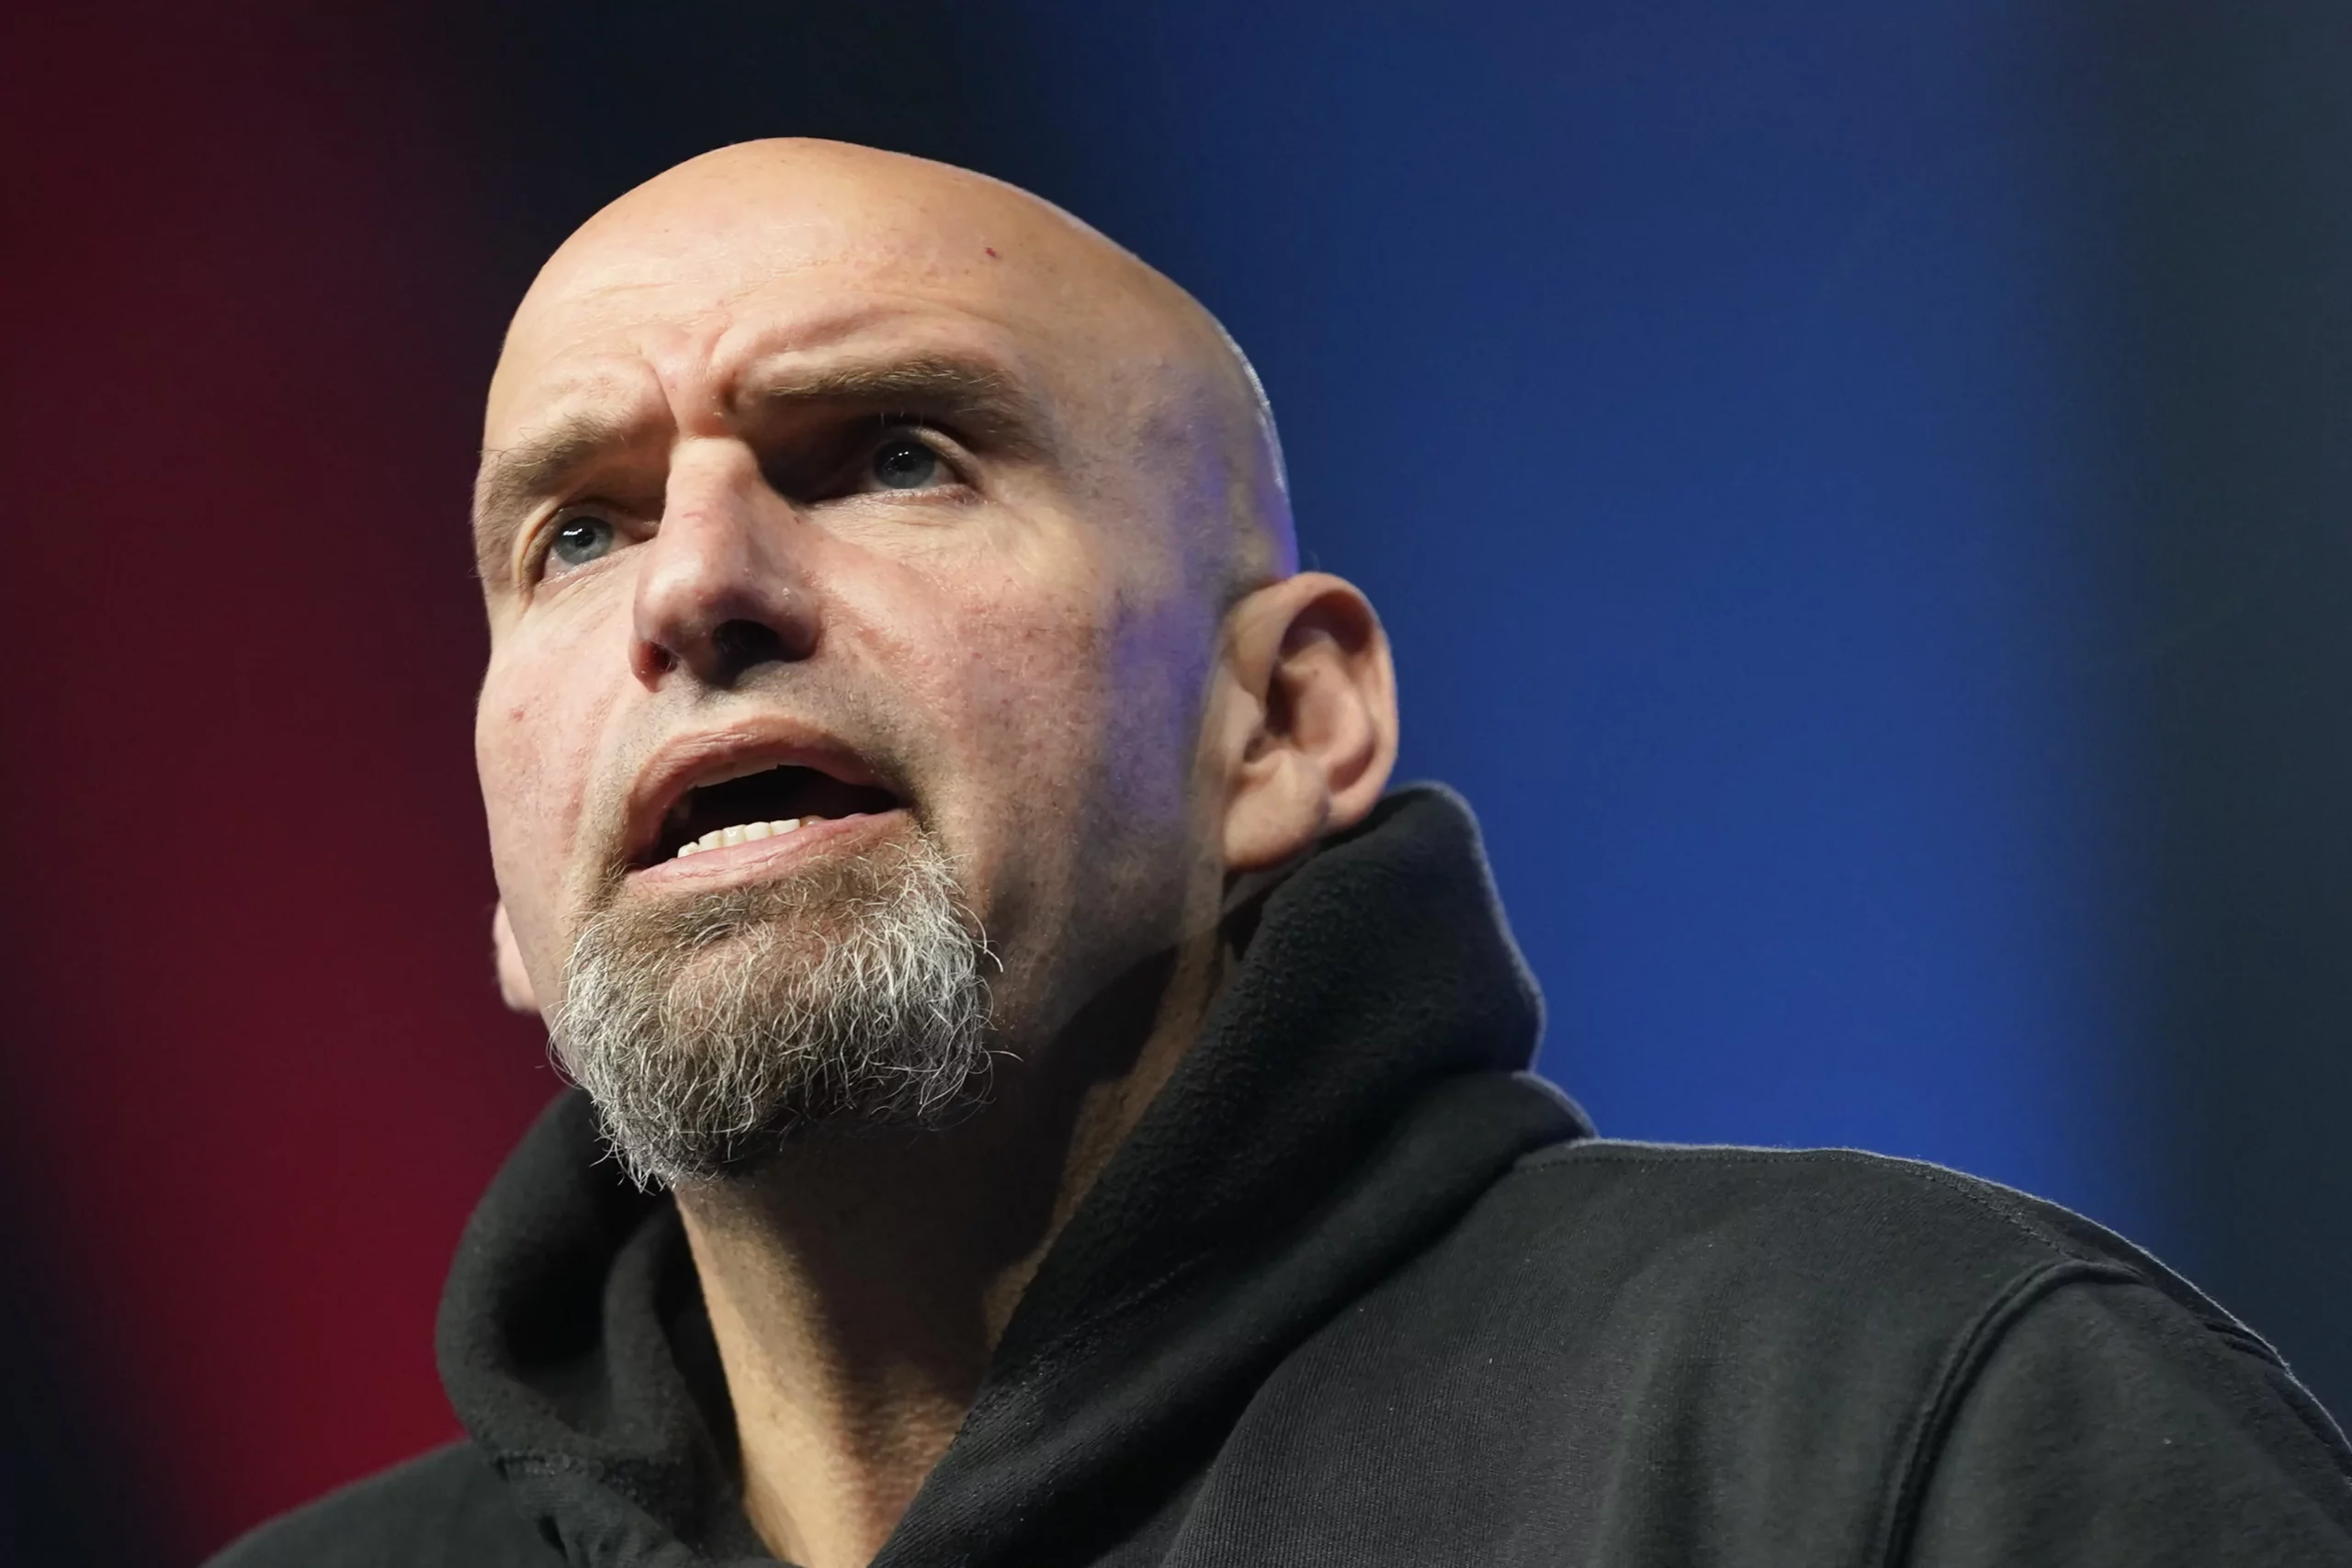 Fetterman thanked for ‘courageous’ support for Israel by Netanyahu